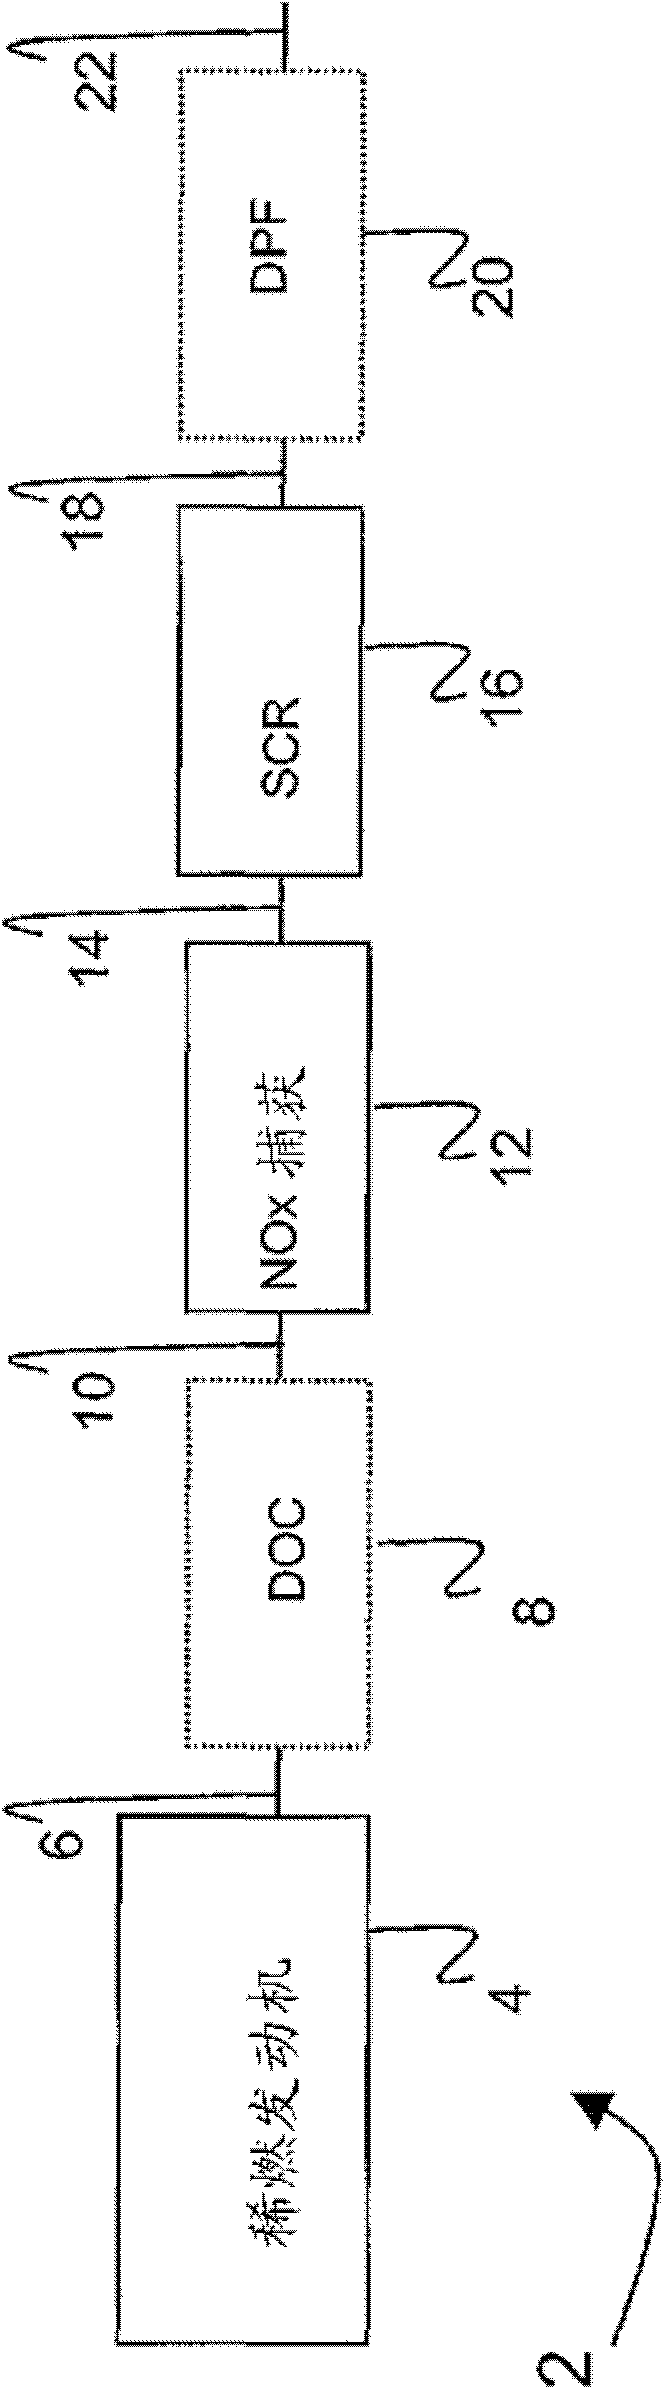 Emissions treatment system with ammonia-generating and SCR catalysts